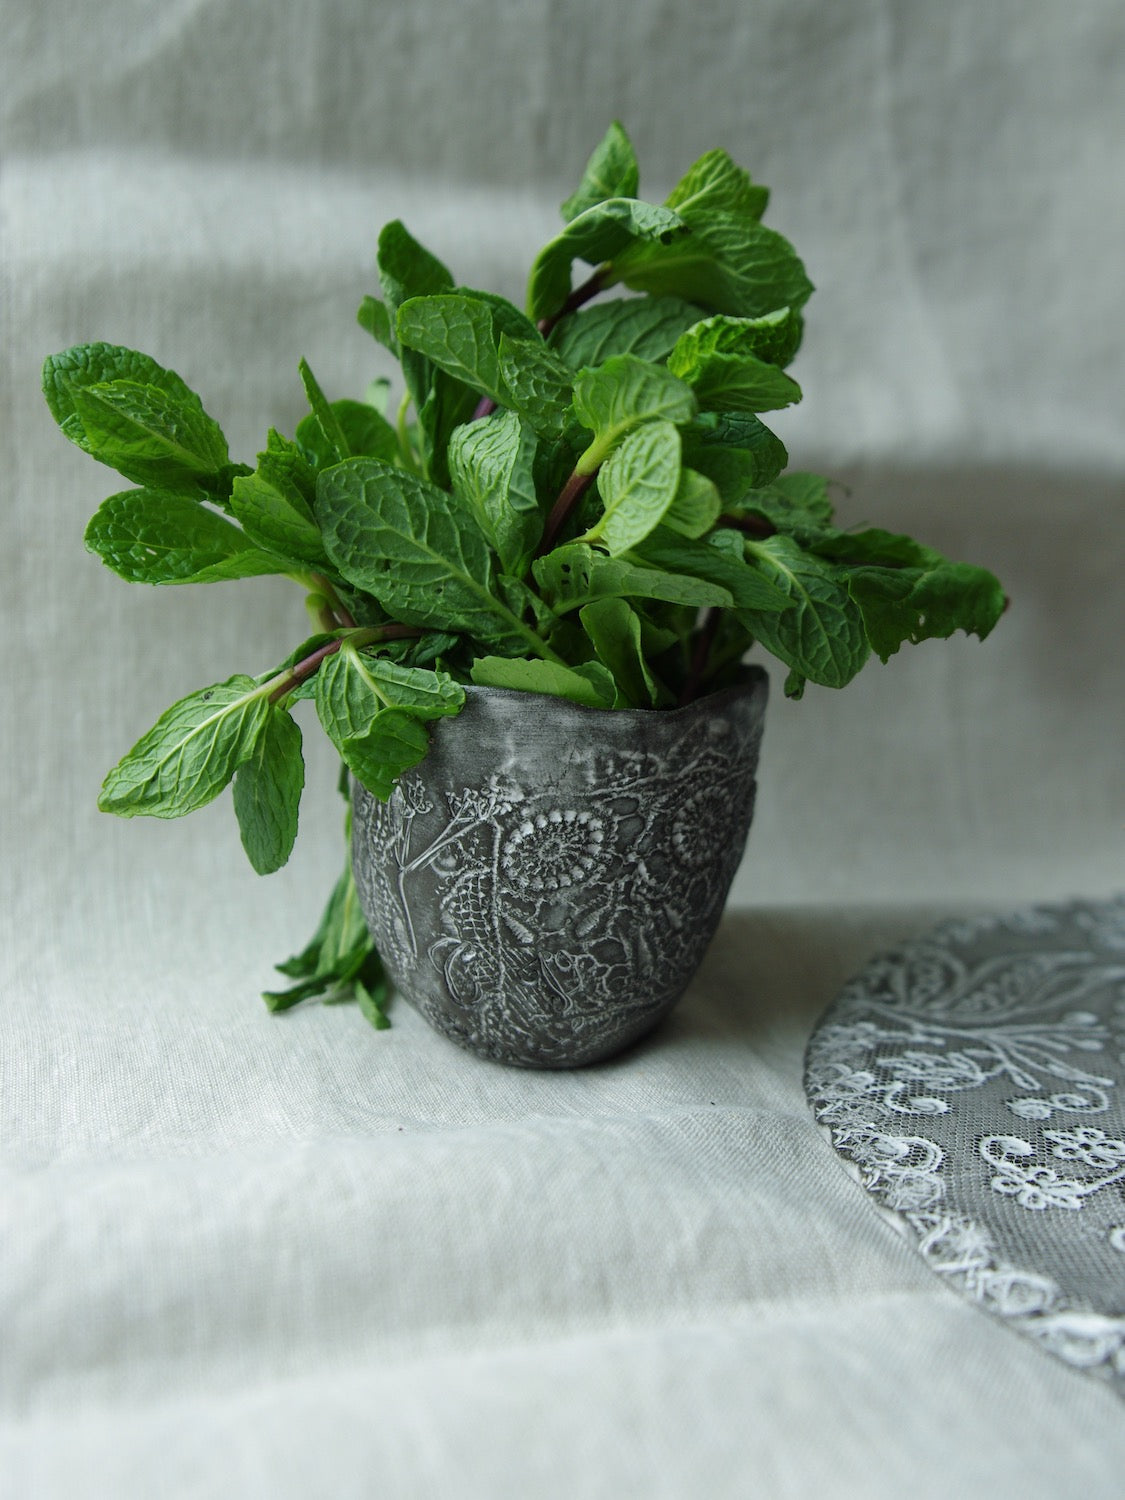 Mint herbs sitting in lace pattern ceramic cup